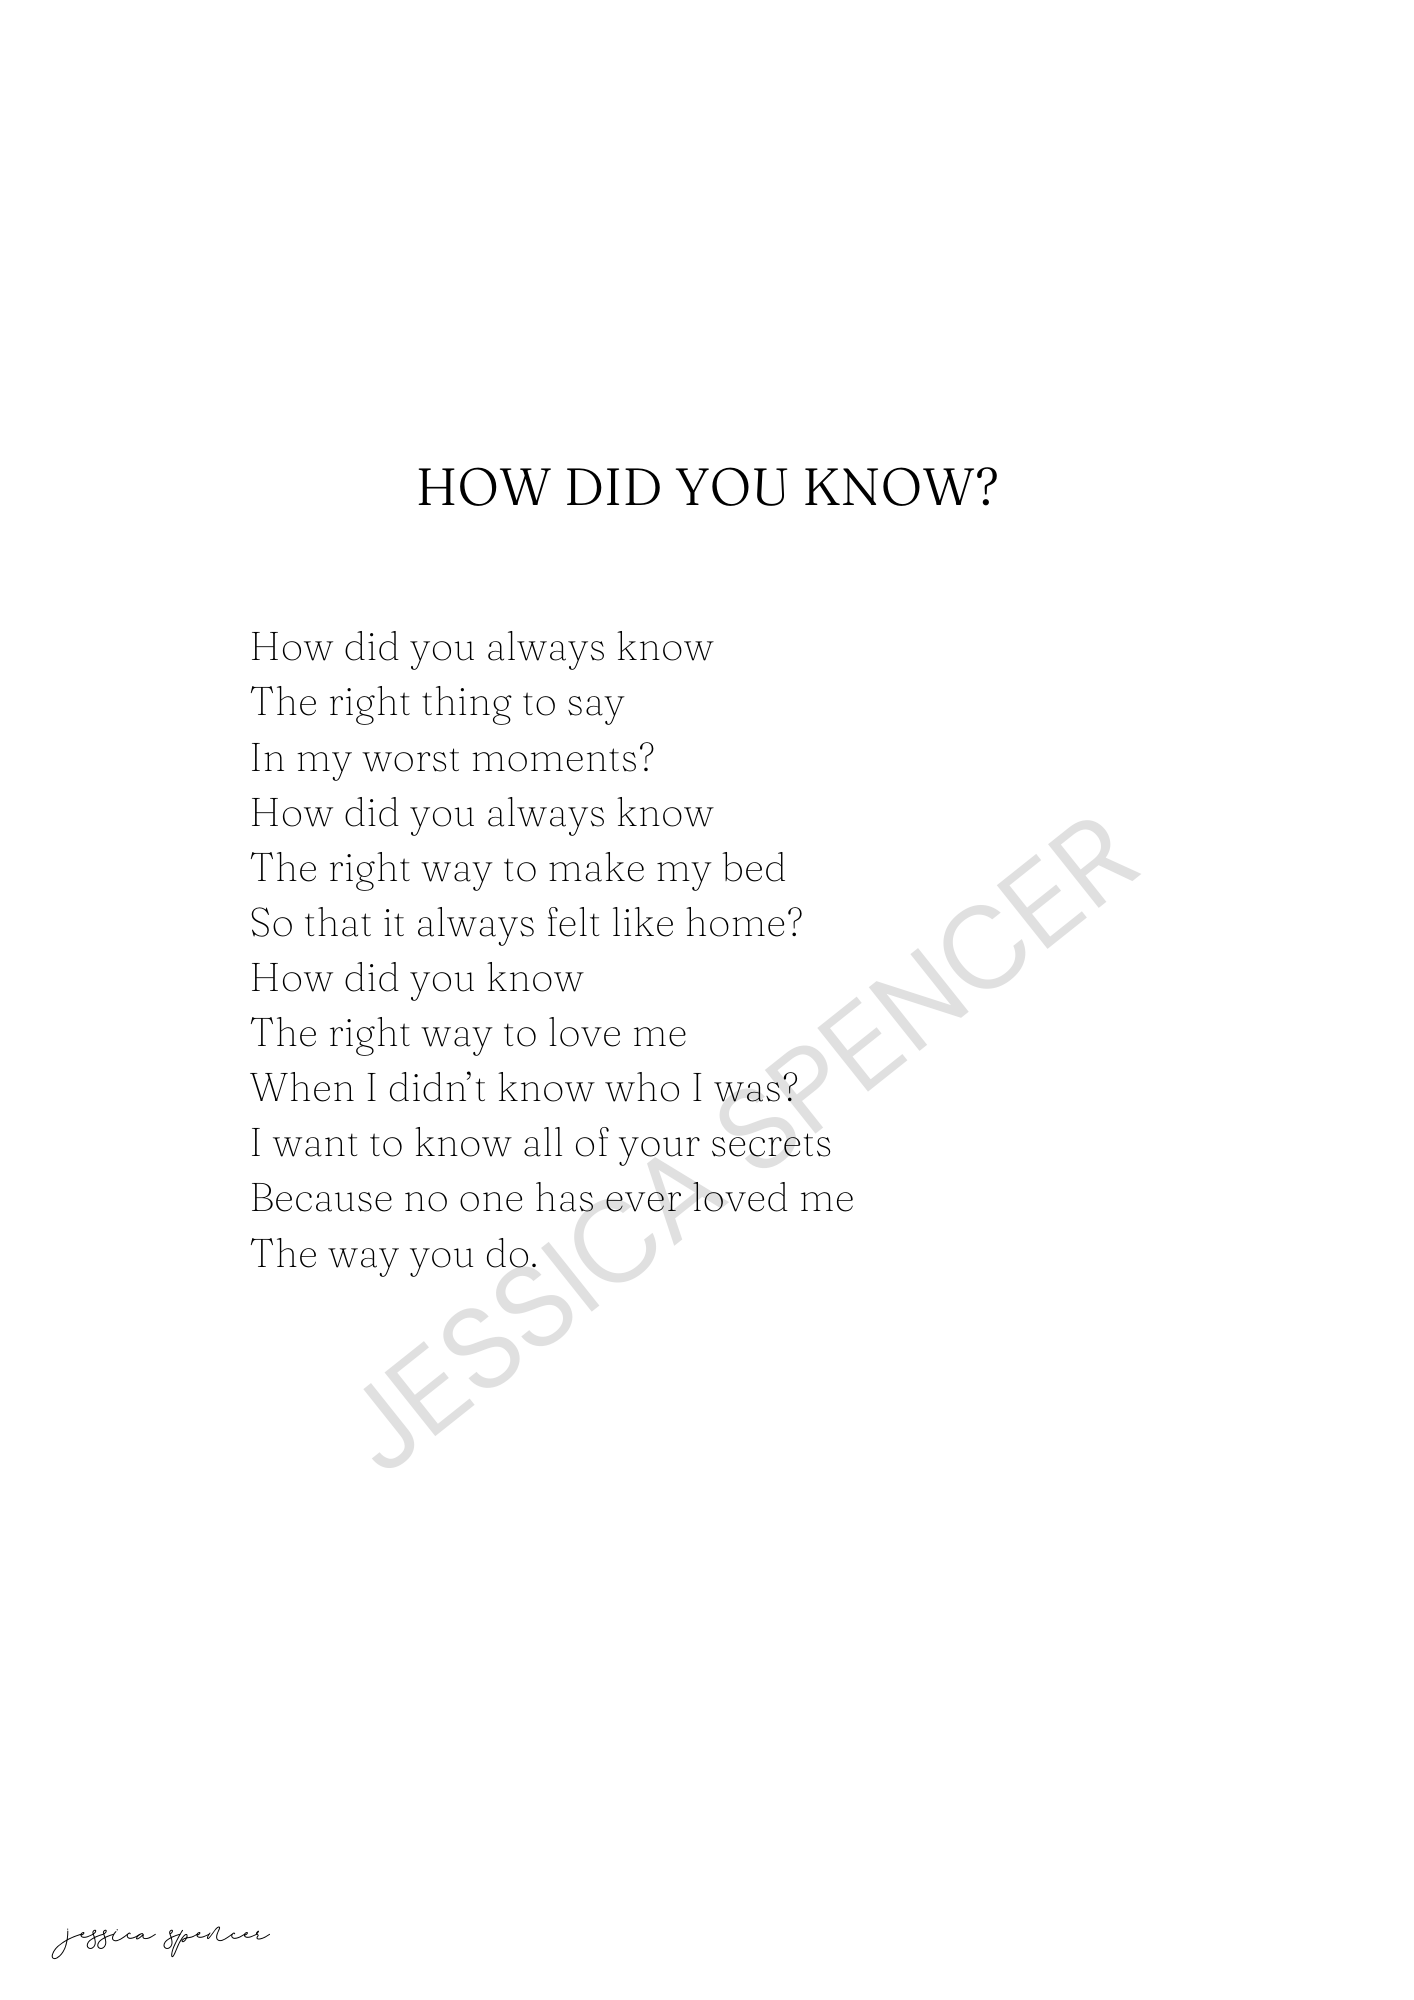 How Did You Know? Poem